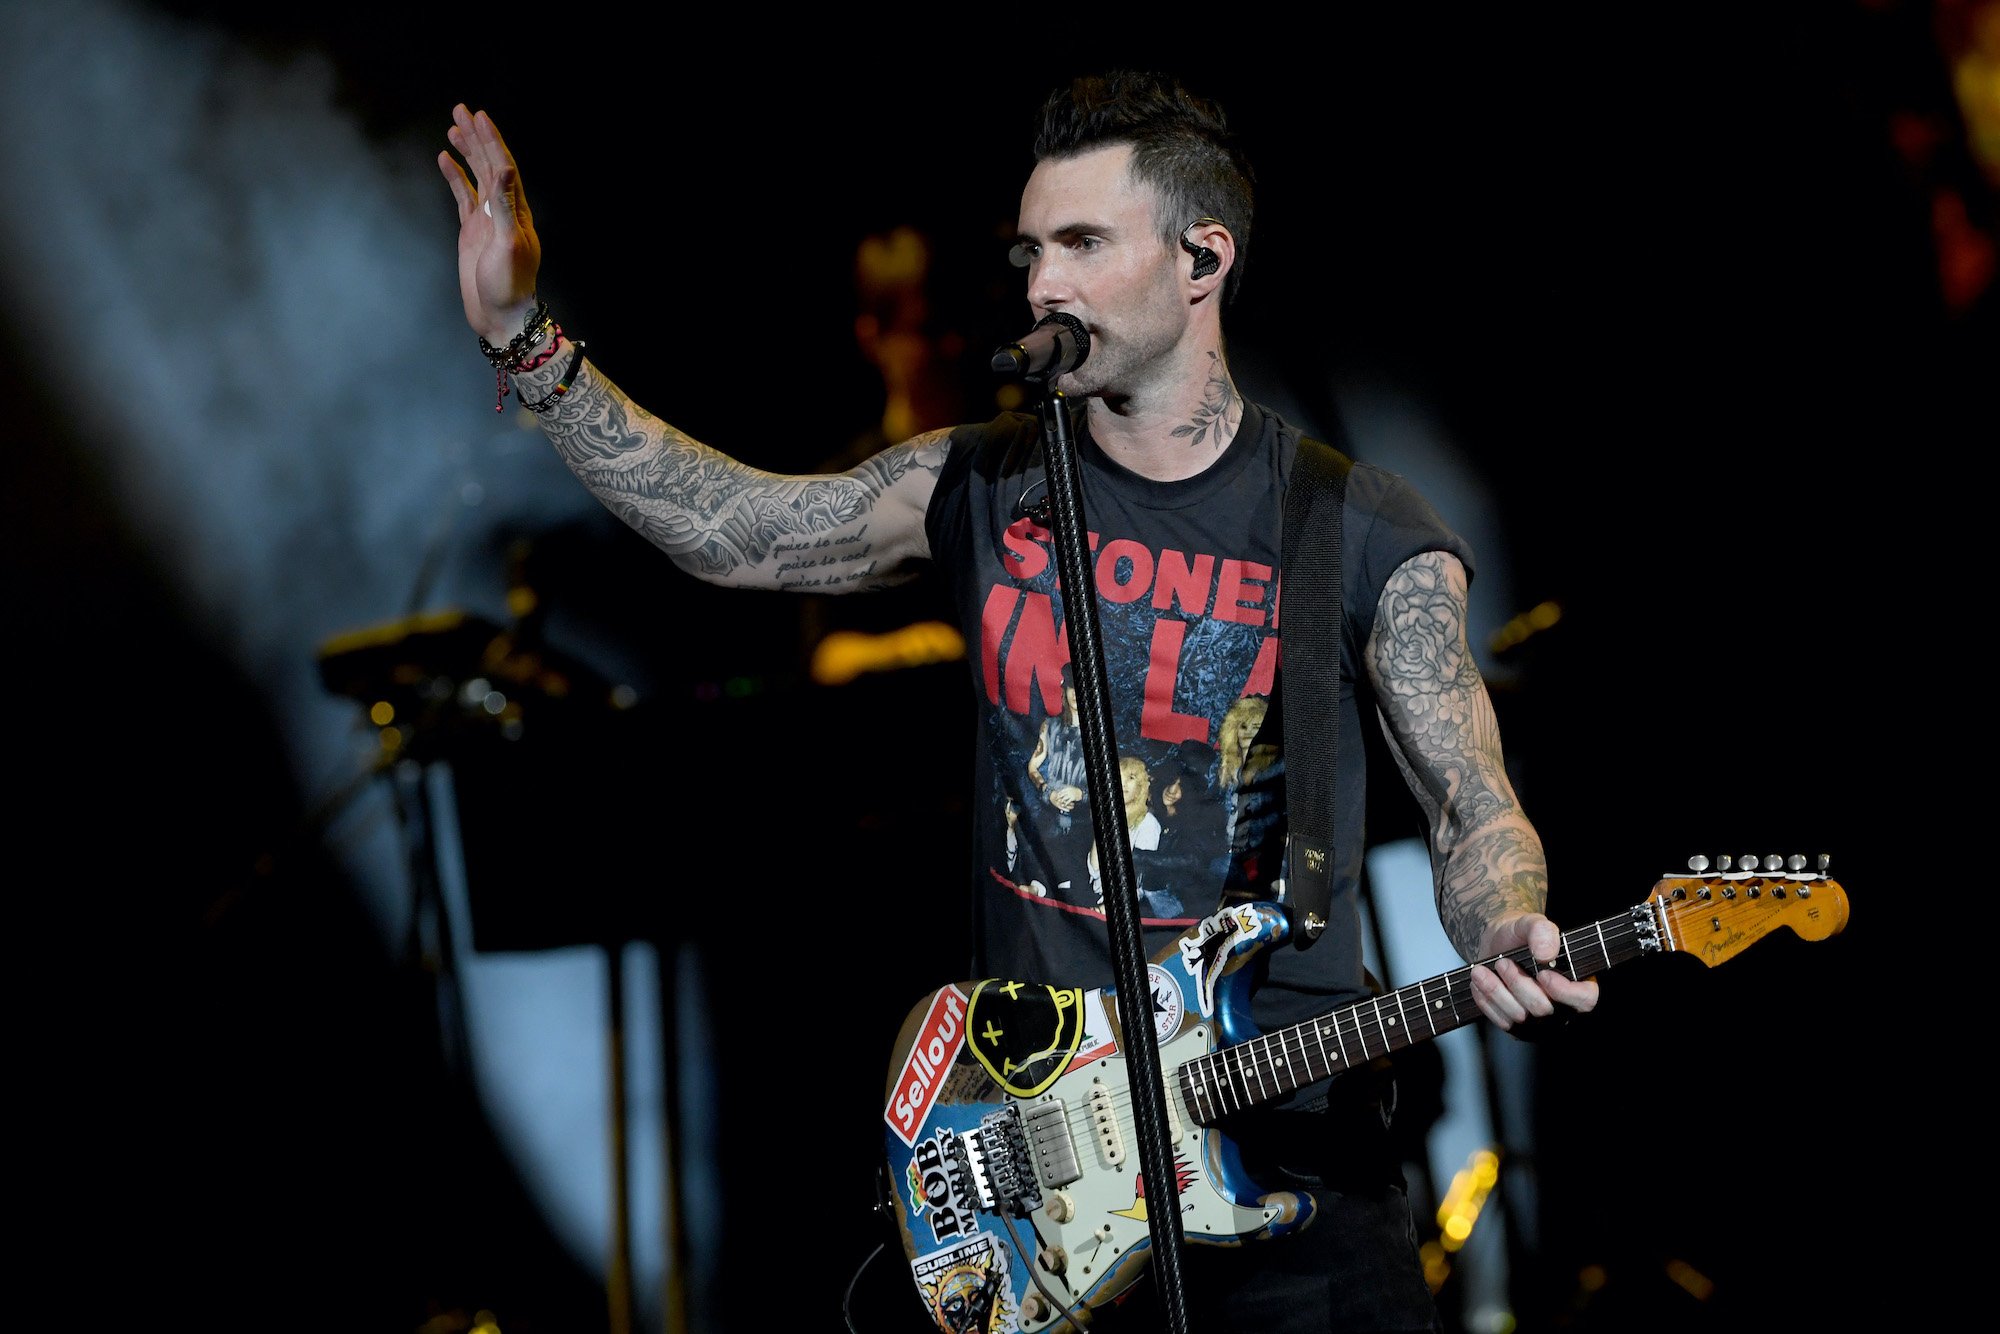 Adam Levine on stage, waving at a crowd